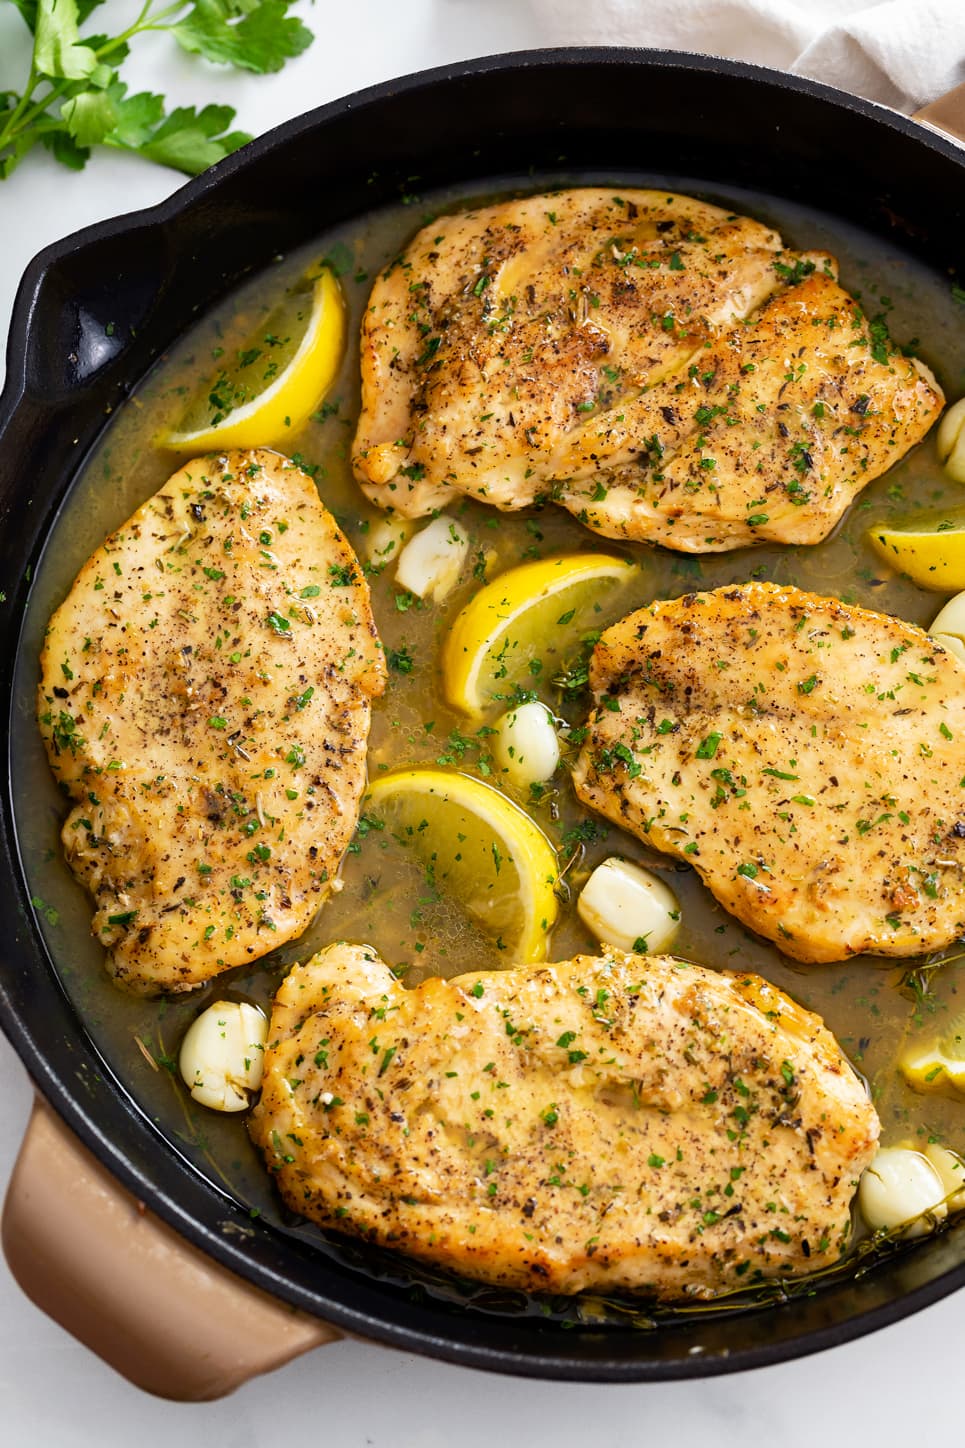 Pan Fried Chicken in a skillet with a pan sauce, lemons, garlic, and parsley.